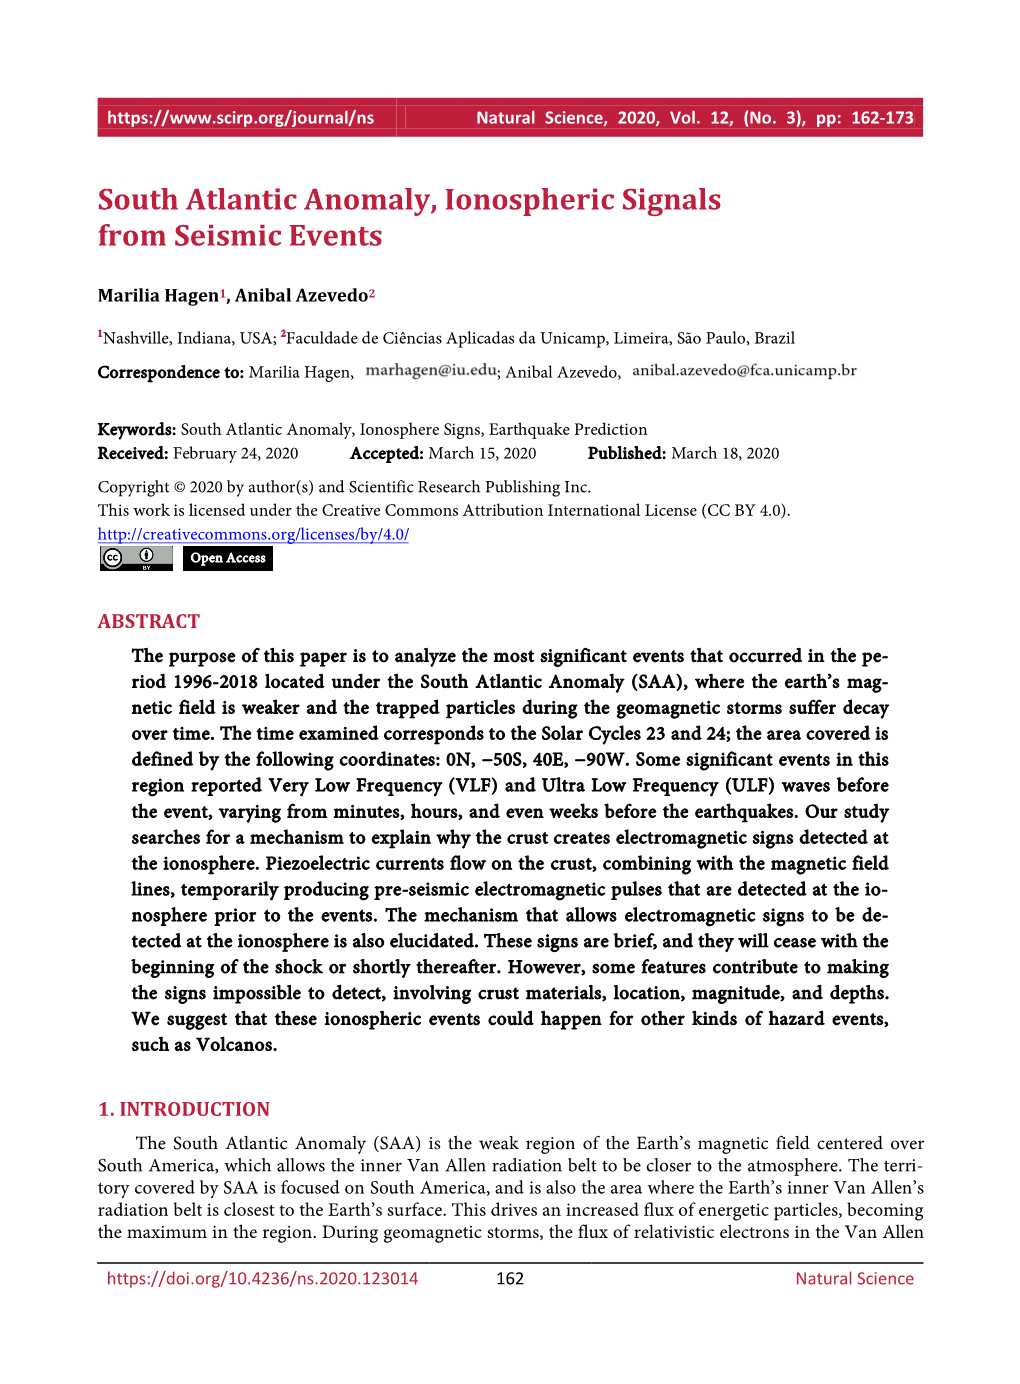 South Atlantic Anomaly, Ionospheric Signals from Seismic Events